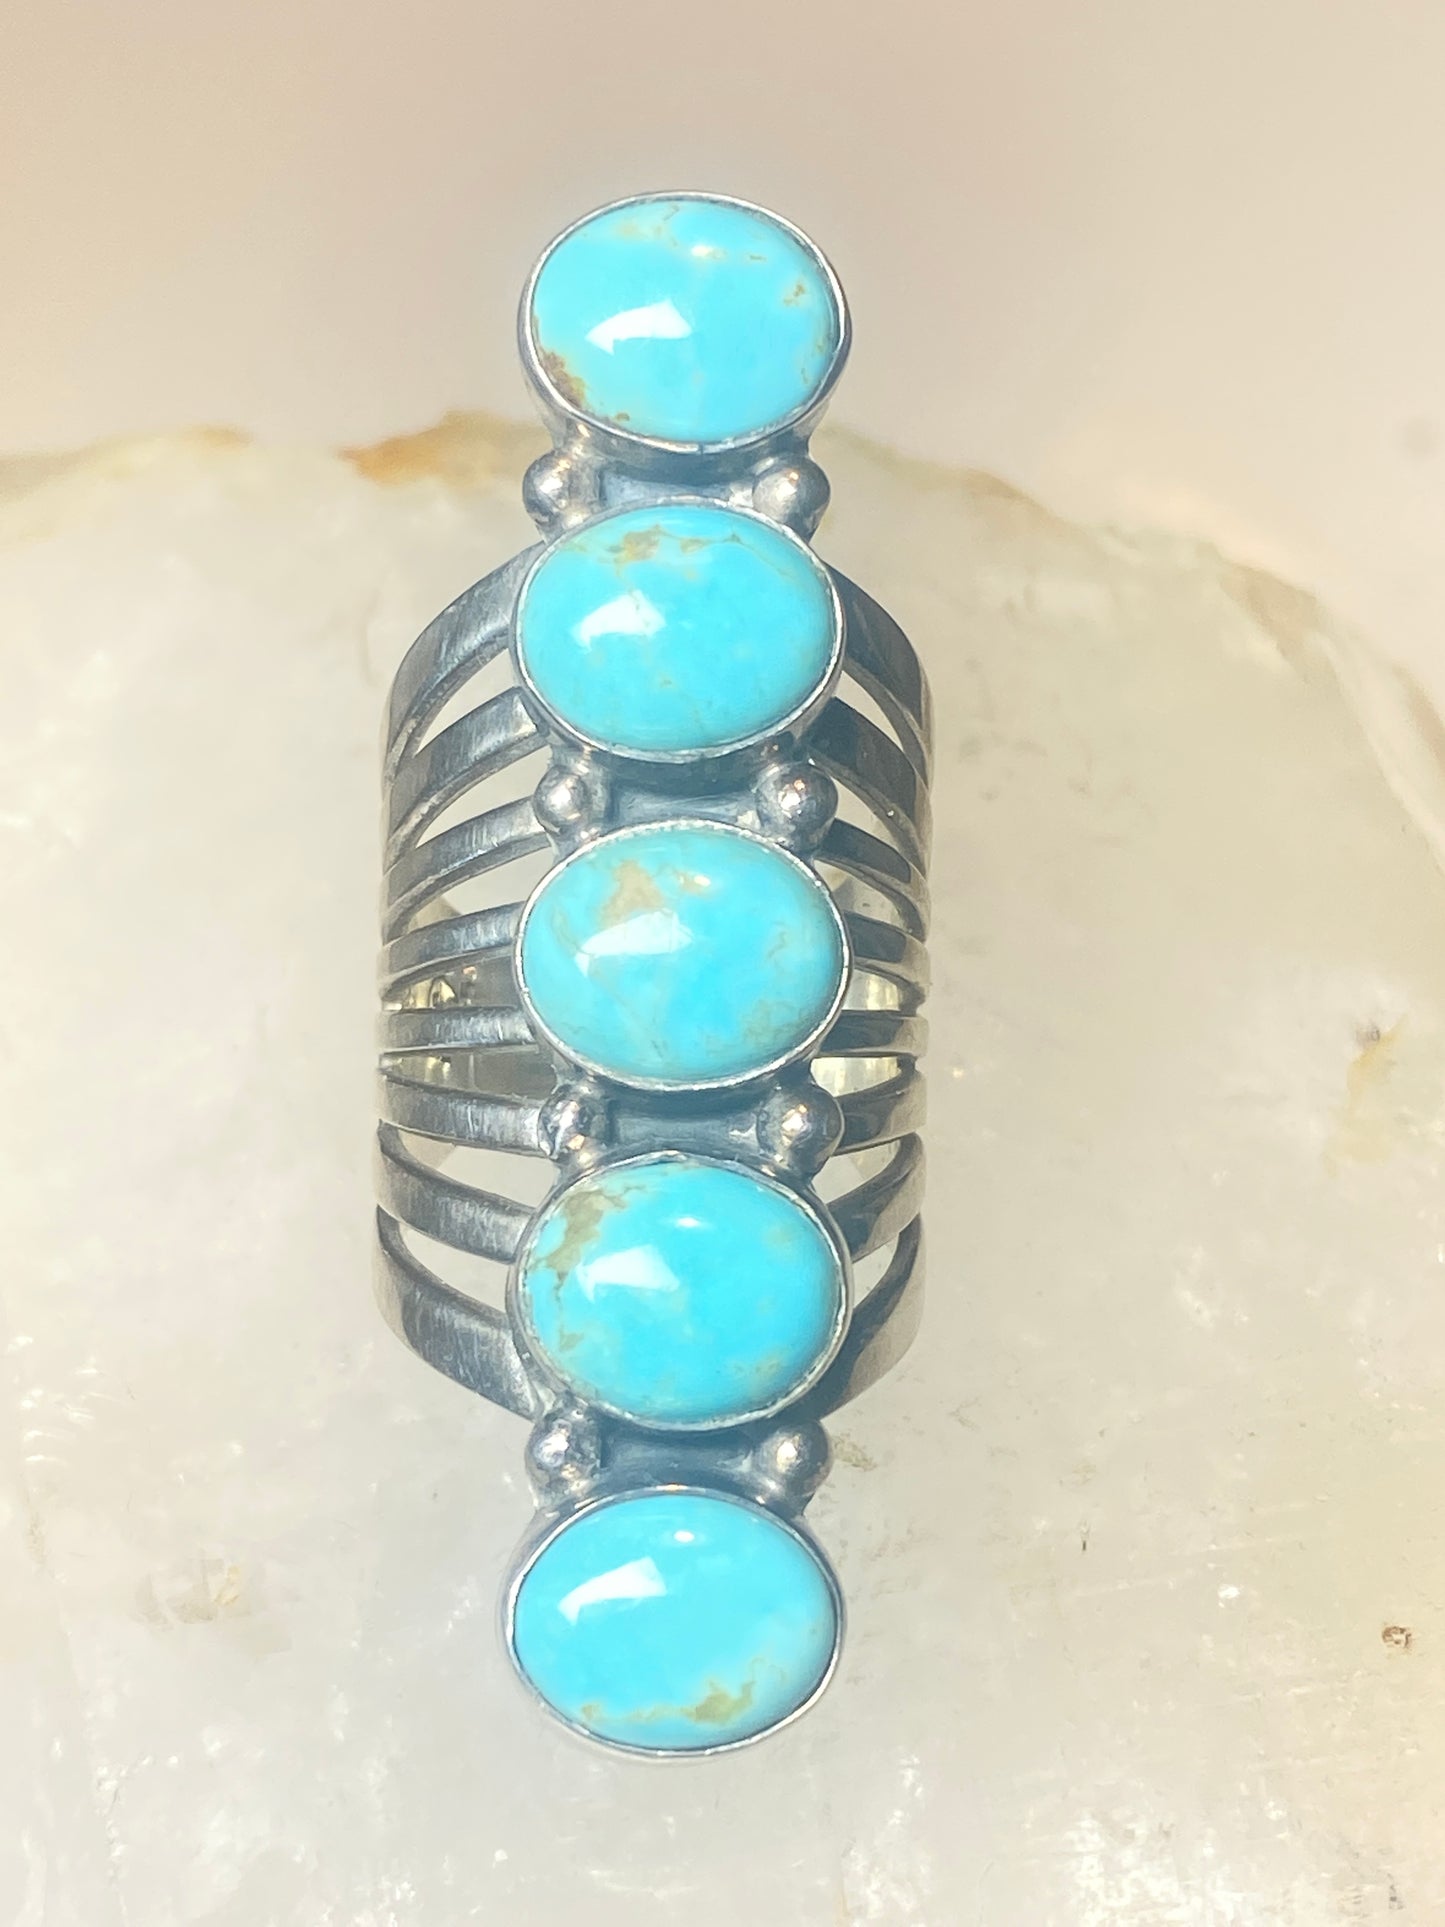 Long turquoise ring size 5.75  southwest sterling silver women